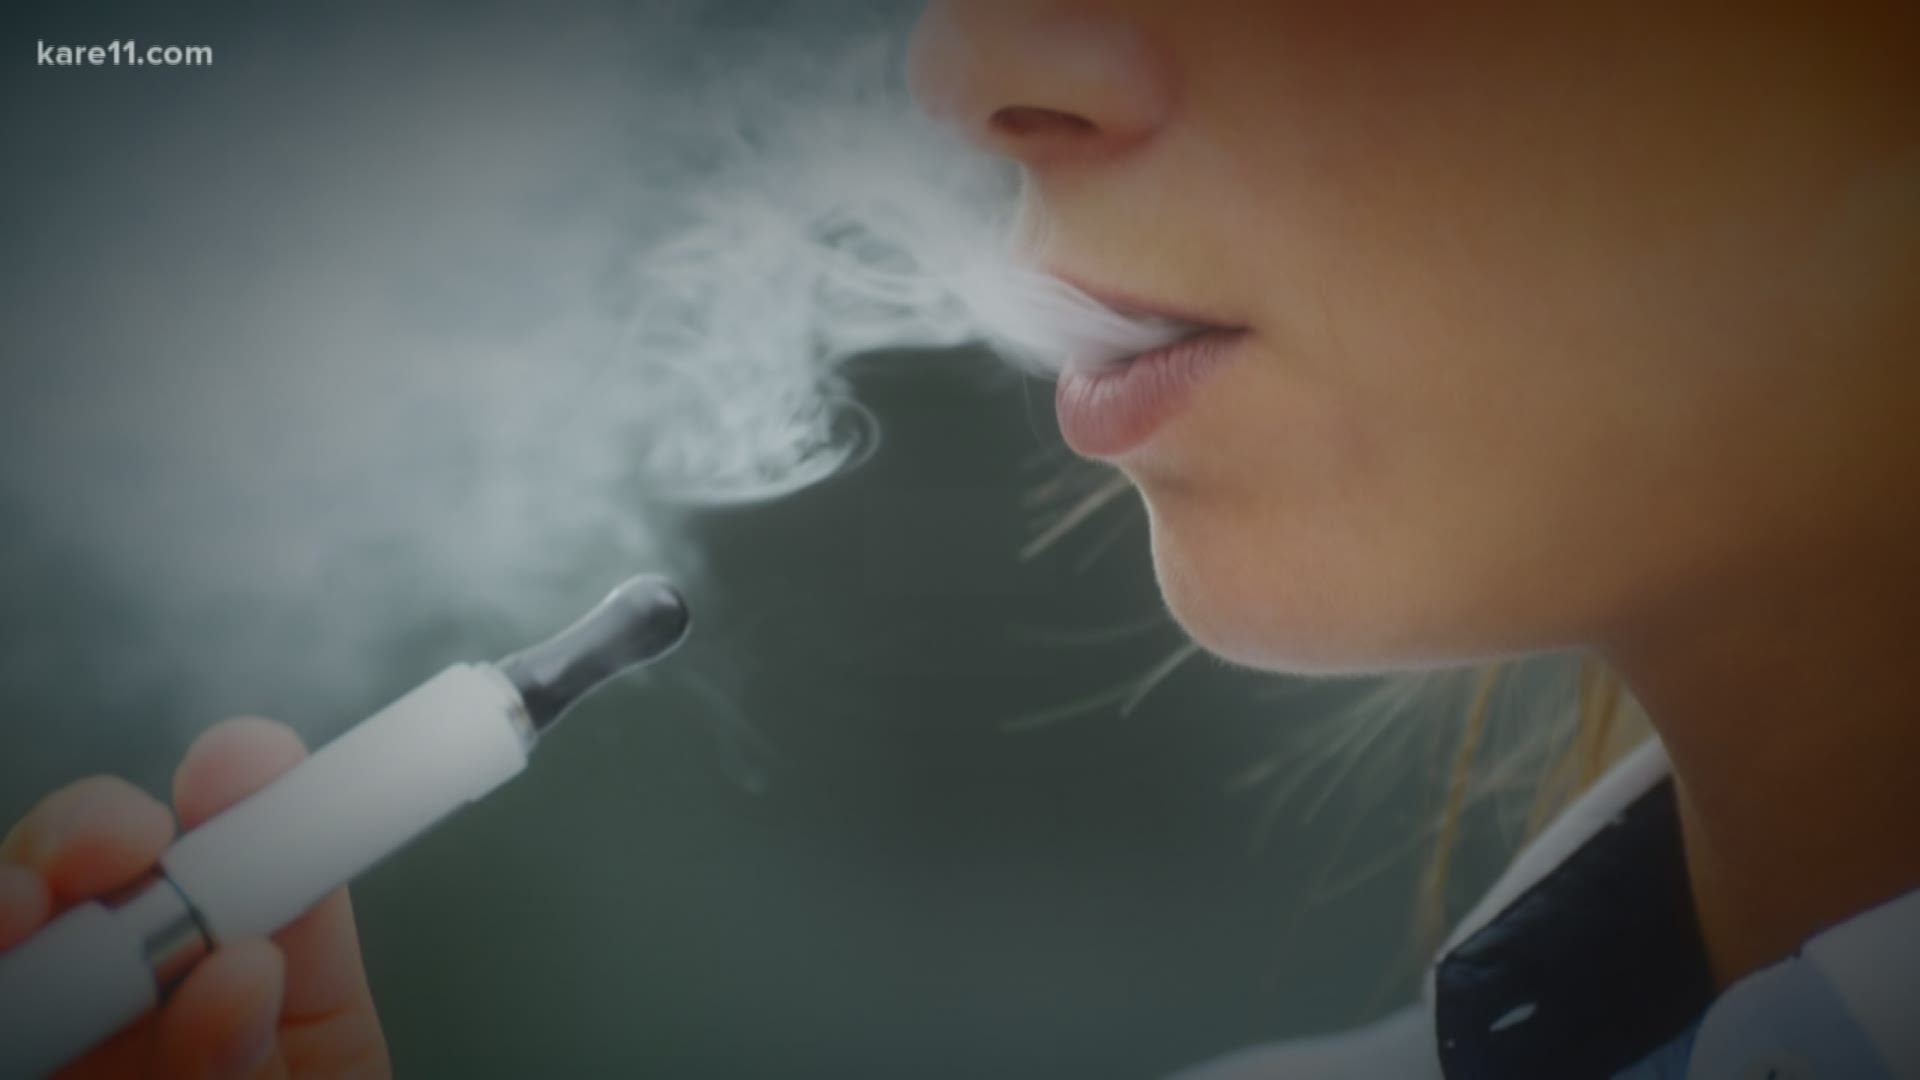 A new diversion program features nine different categories that students navigate online. Each one helps educate students about e-cigarette use.